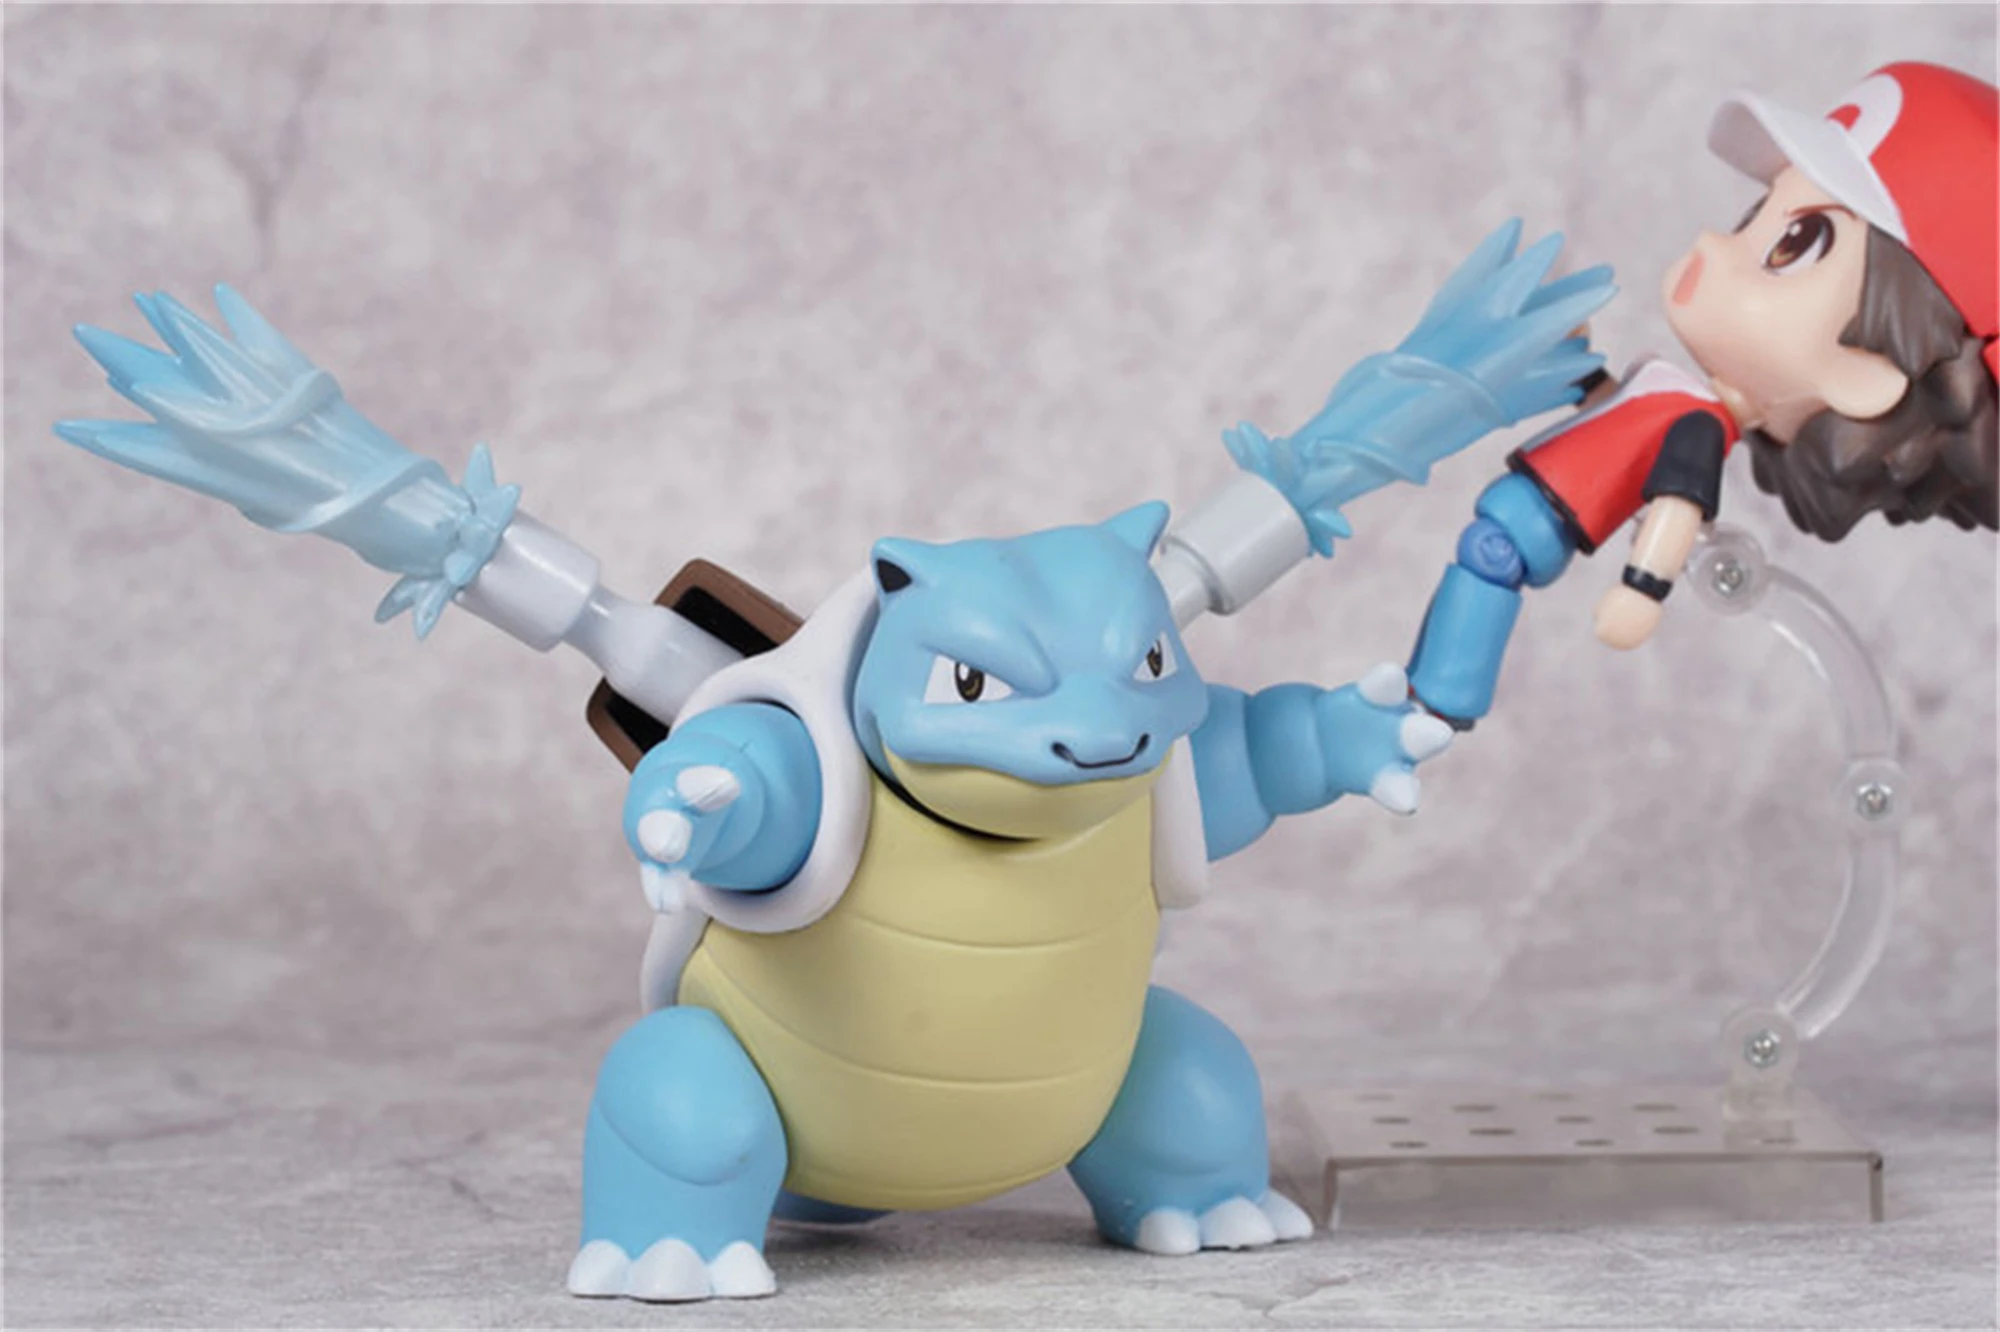 Pokemon Anime Red 425 Bulbasaur Squirtle Charmander Action Figure